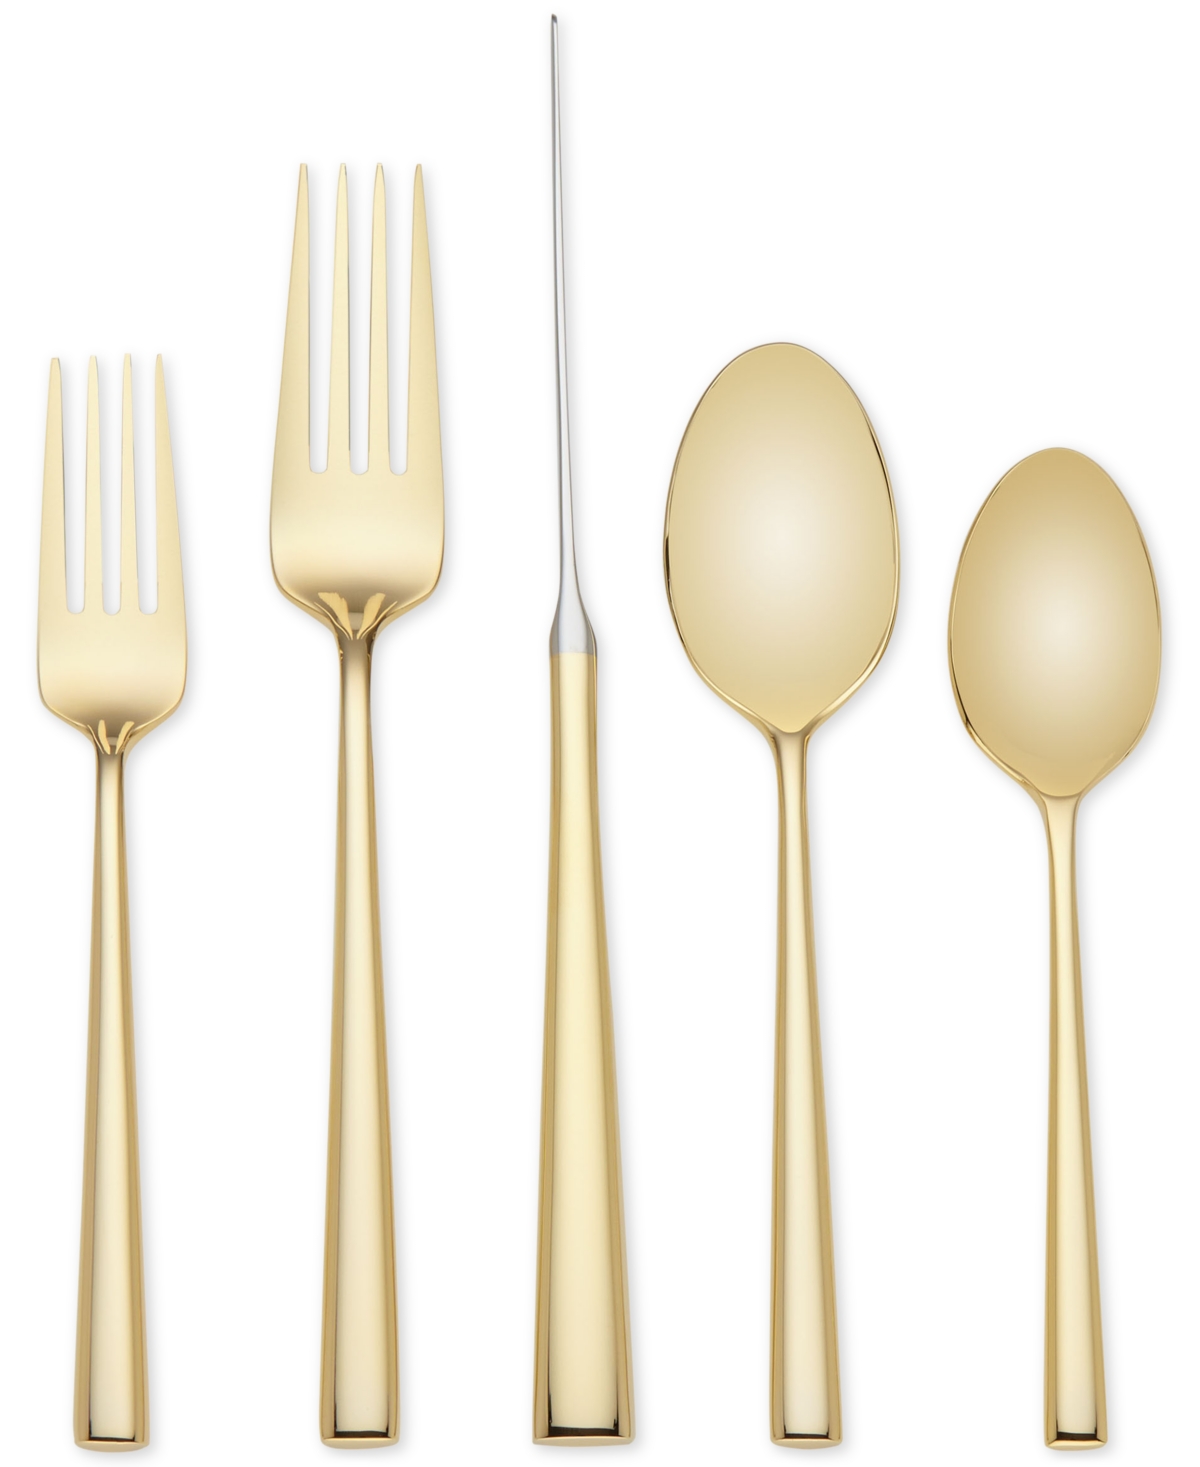 Kate Spade Malmo Gold 20-pc Flatware Set, Service For 4 In Gold Plated